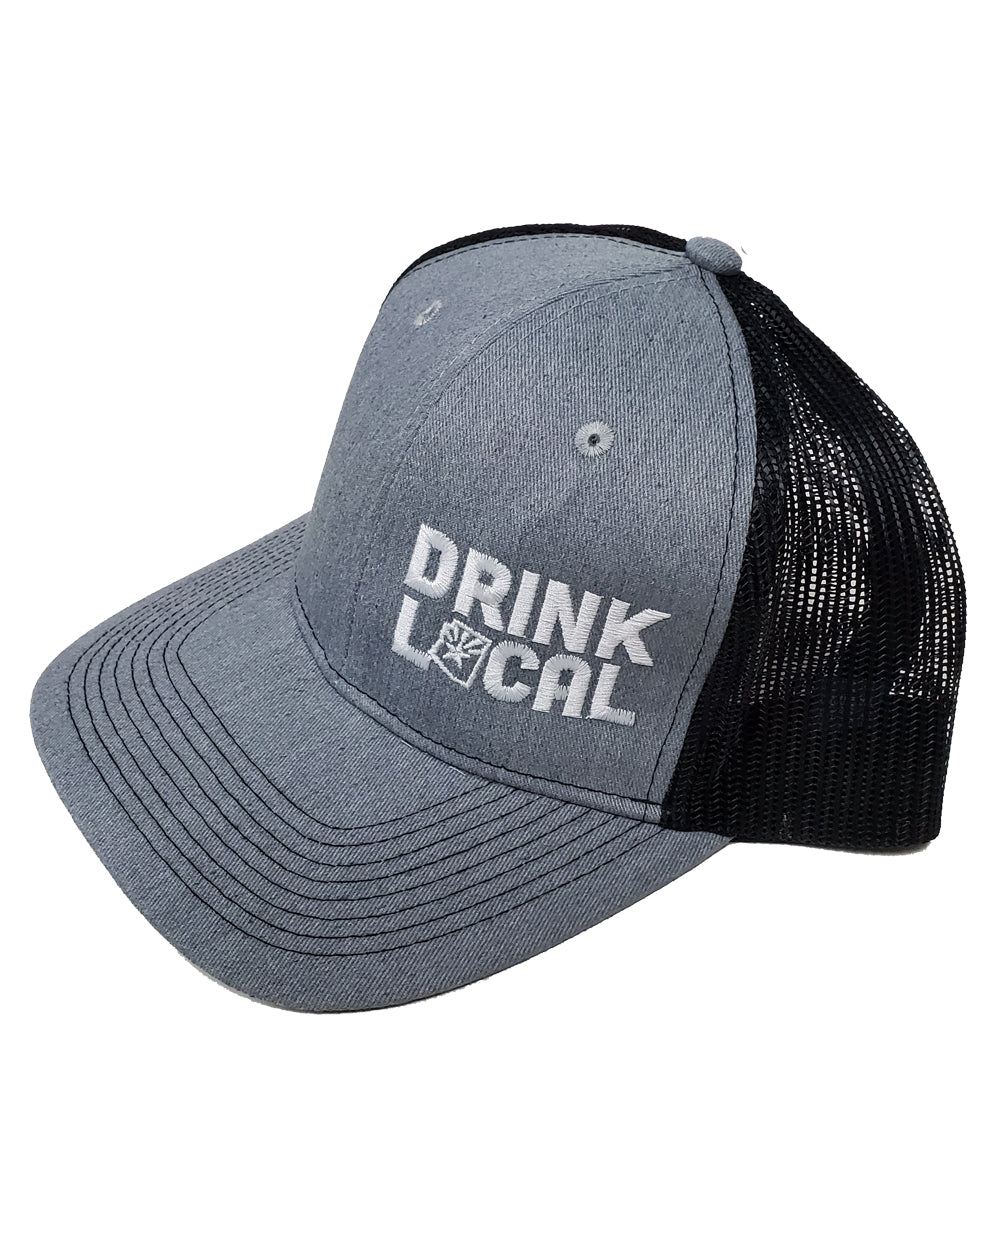 Drink Local (Mesh Back Hat)